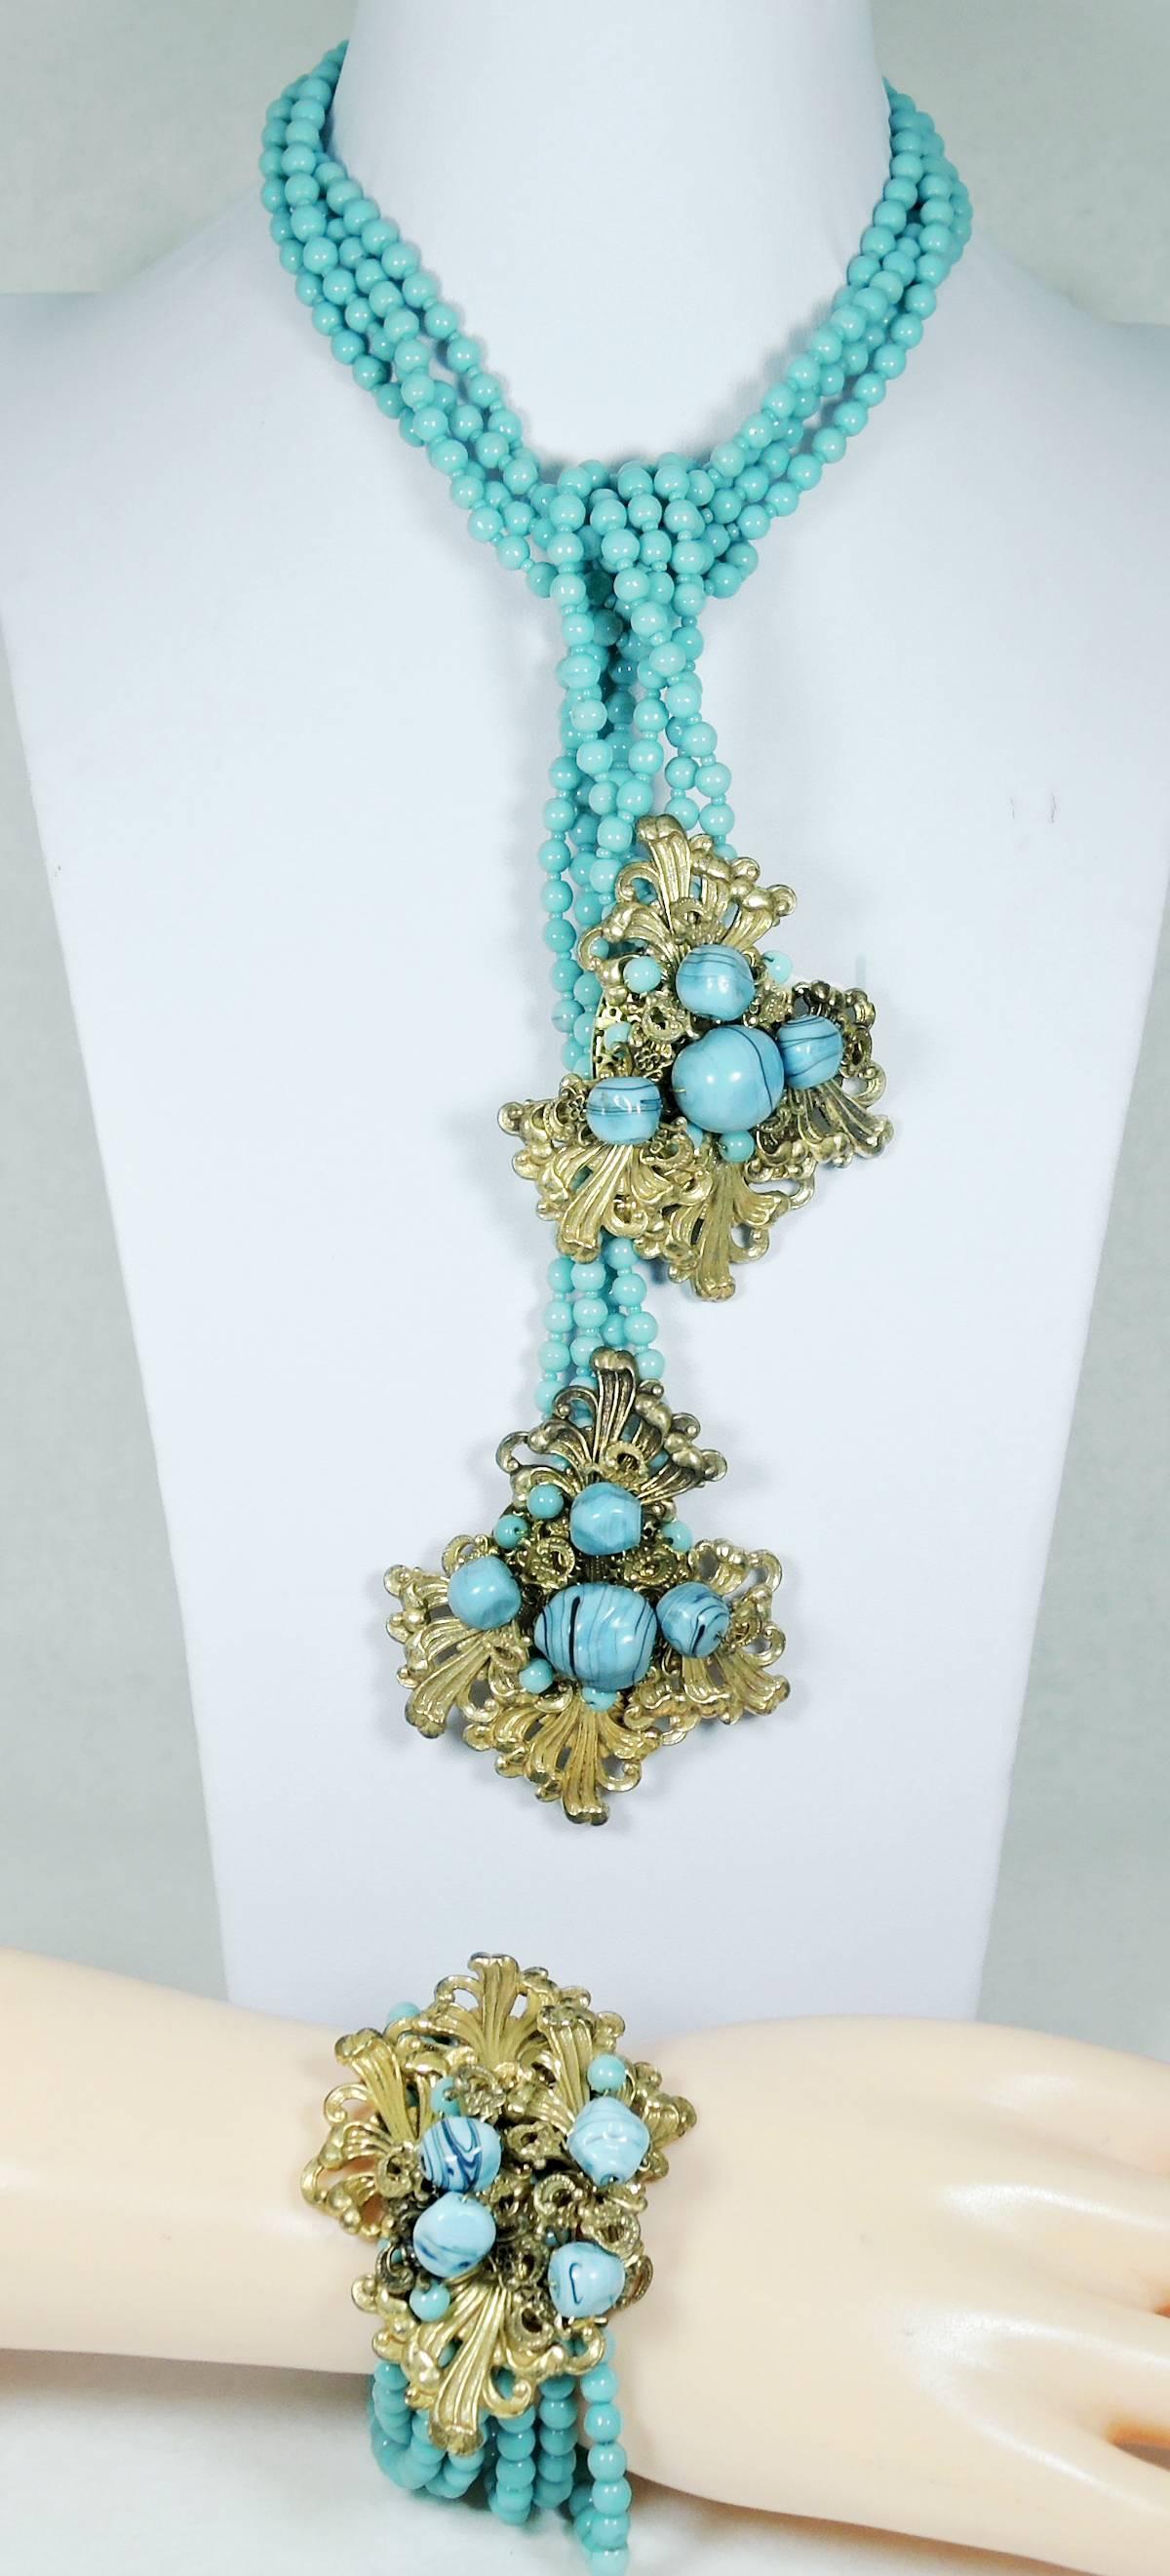 This is an exquisite, fabulous Miriam Haskell lariat necklace that was made with four strands of the signature hand wired faux turquoise beads that Haskell is known for. Each end has a dress clip. The gold tone hardware on the clip part has wired